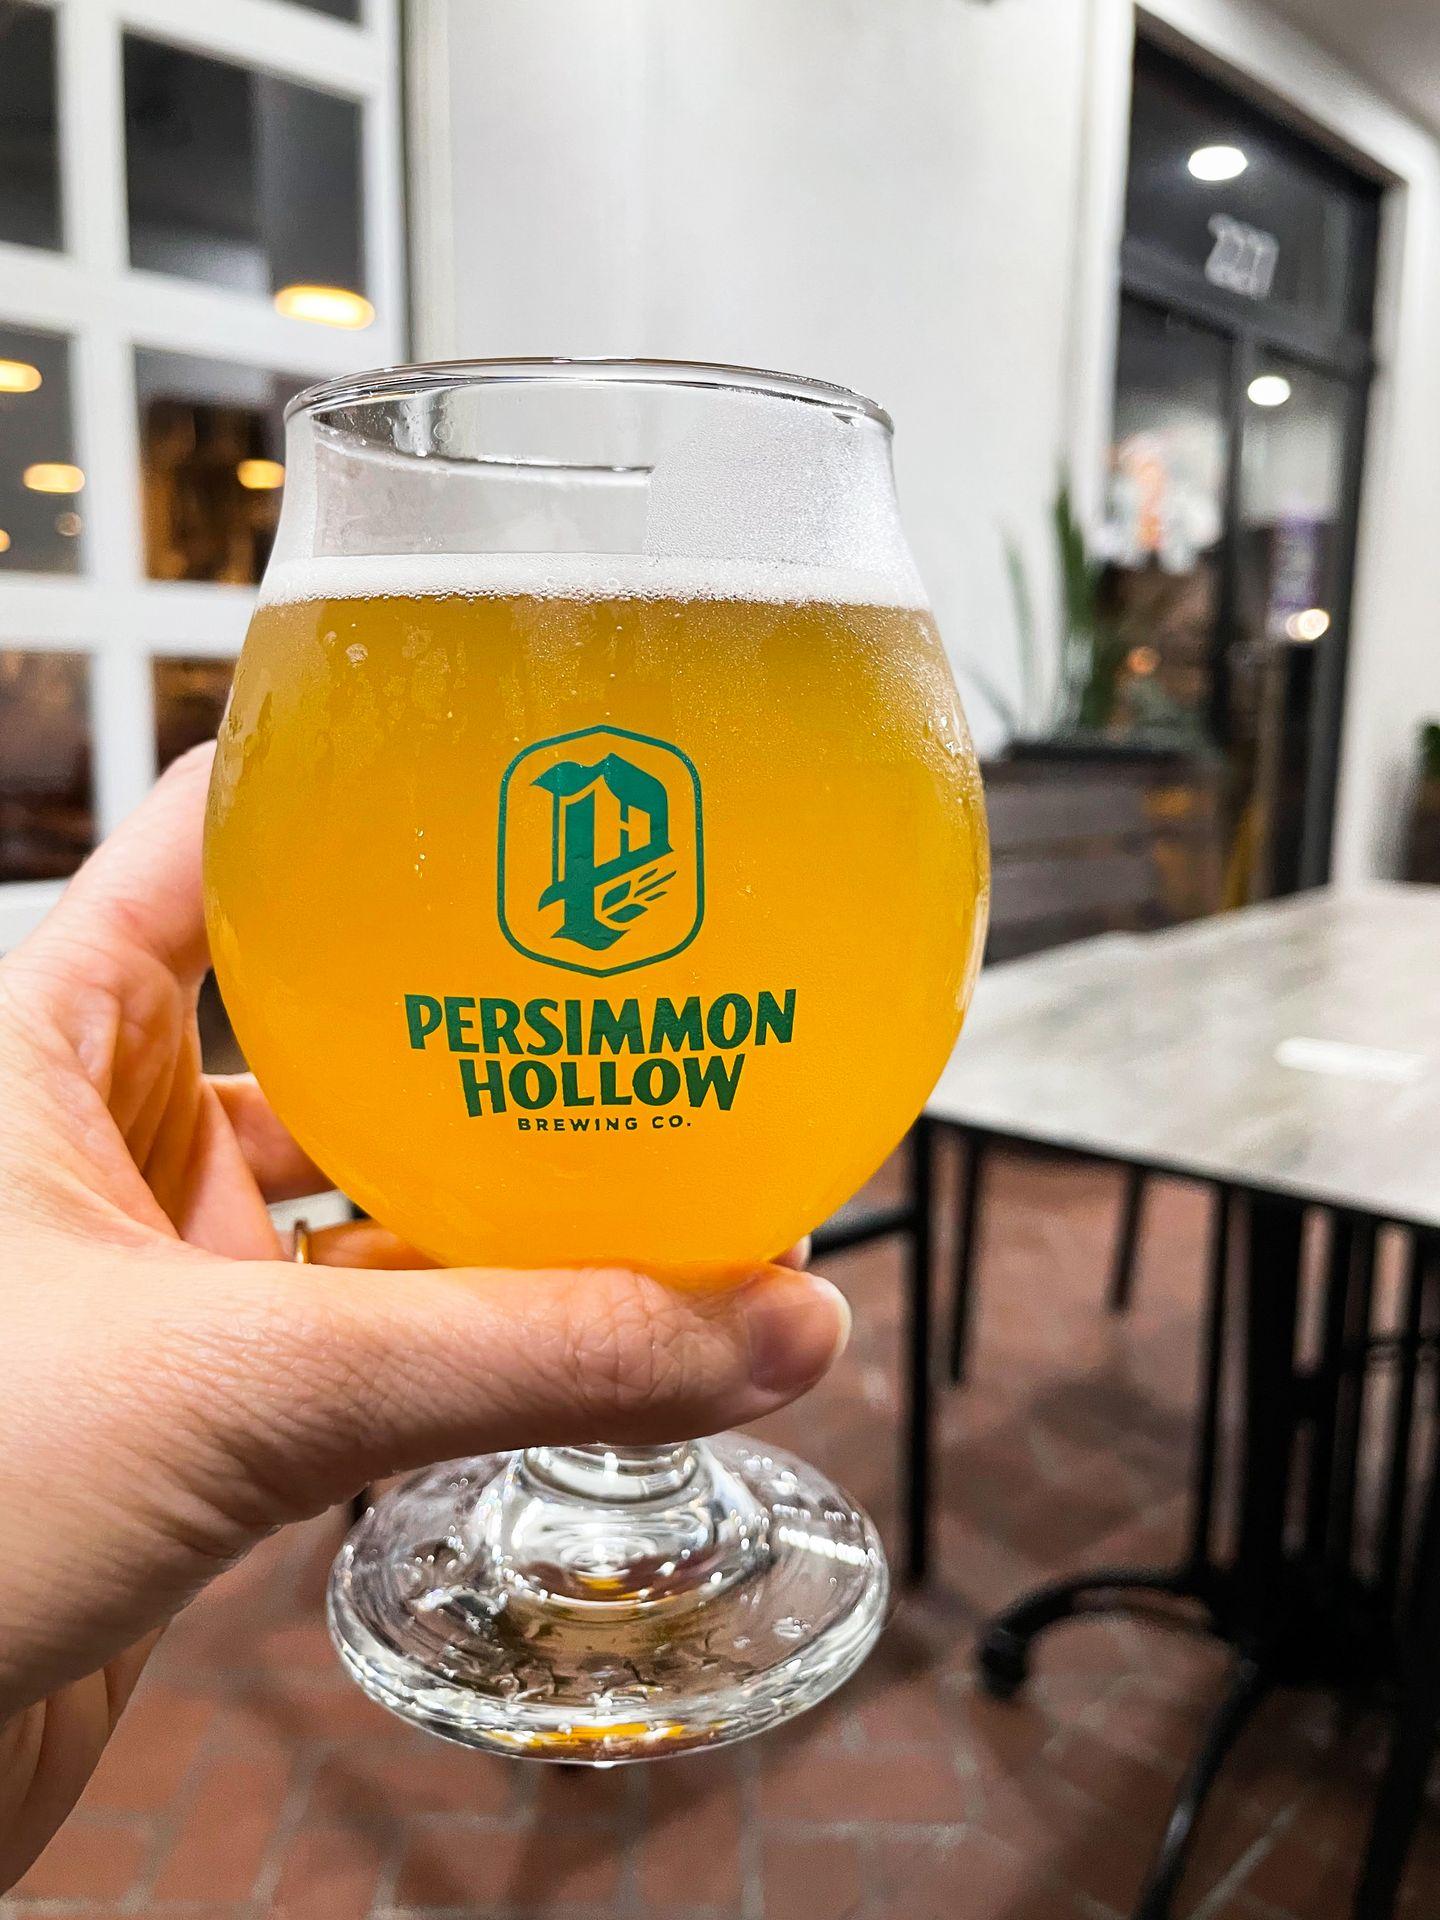 Holding up a golden beer in a glass that reads 'Persimmon Hollow.'